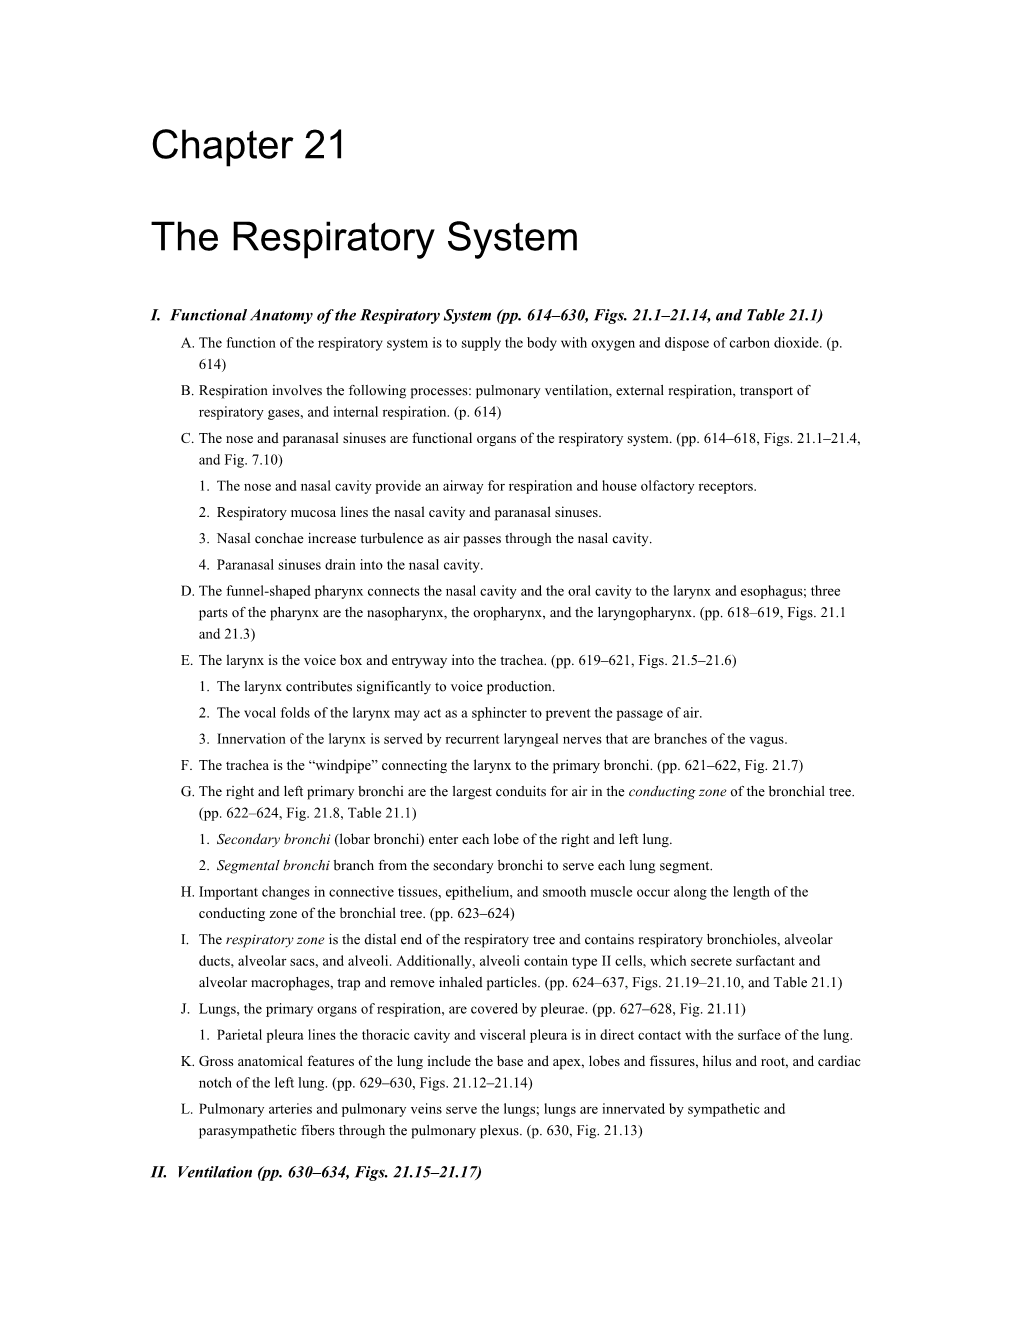 I. Functional Anatomy of the Respiratory System (Pp. 614 630, Figs. 21.1 21.14, and Table